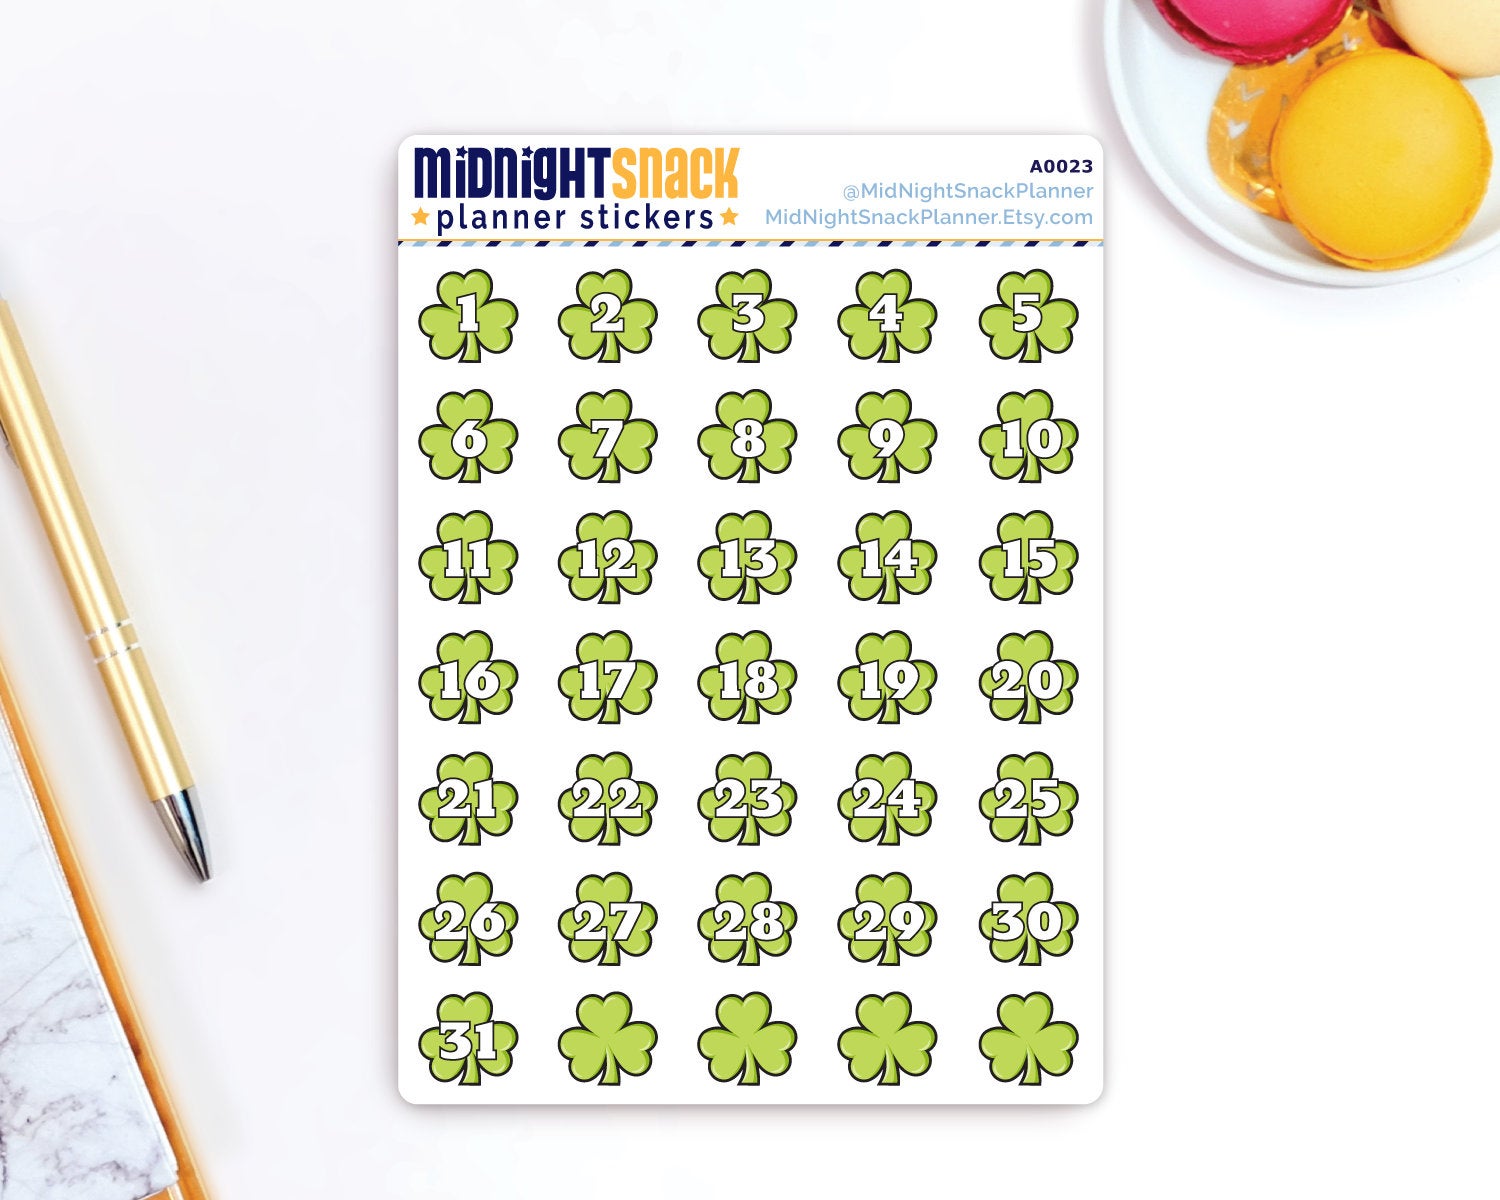 St. Patrick’s Day Shamrock Date Cover Planner Stickers Midnight Snack Planner